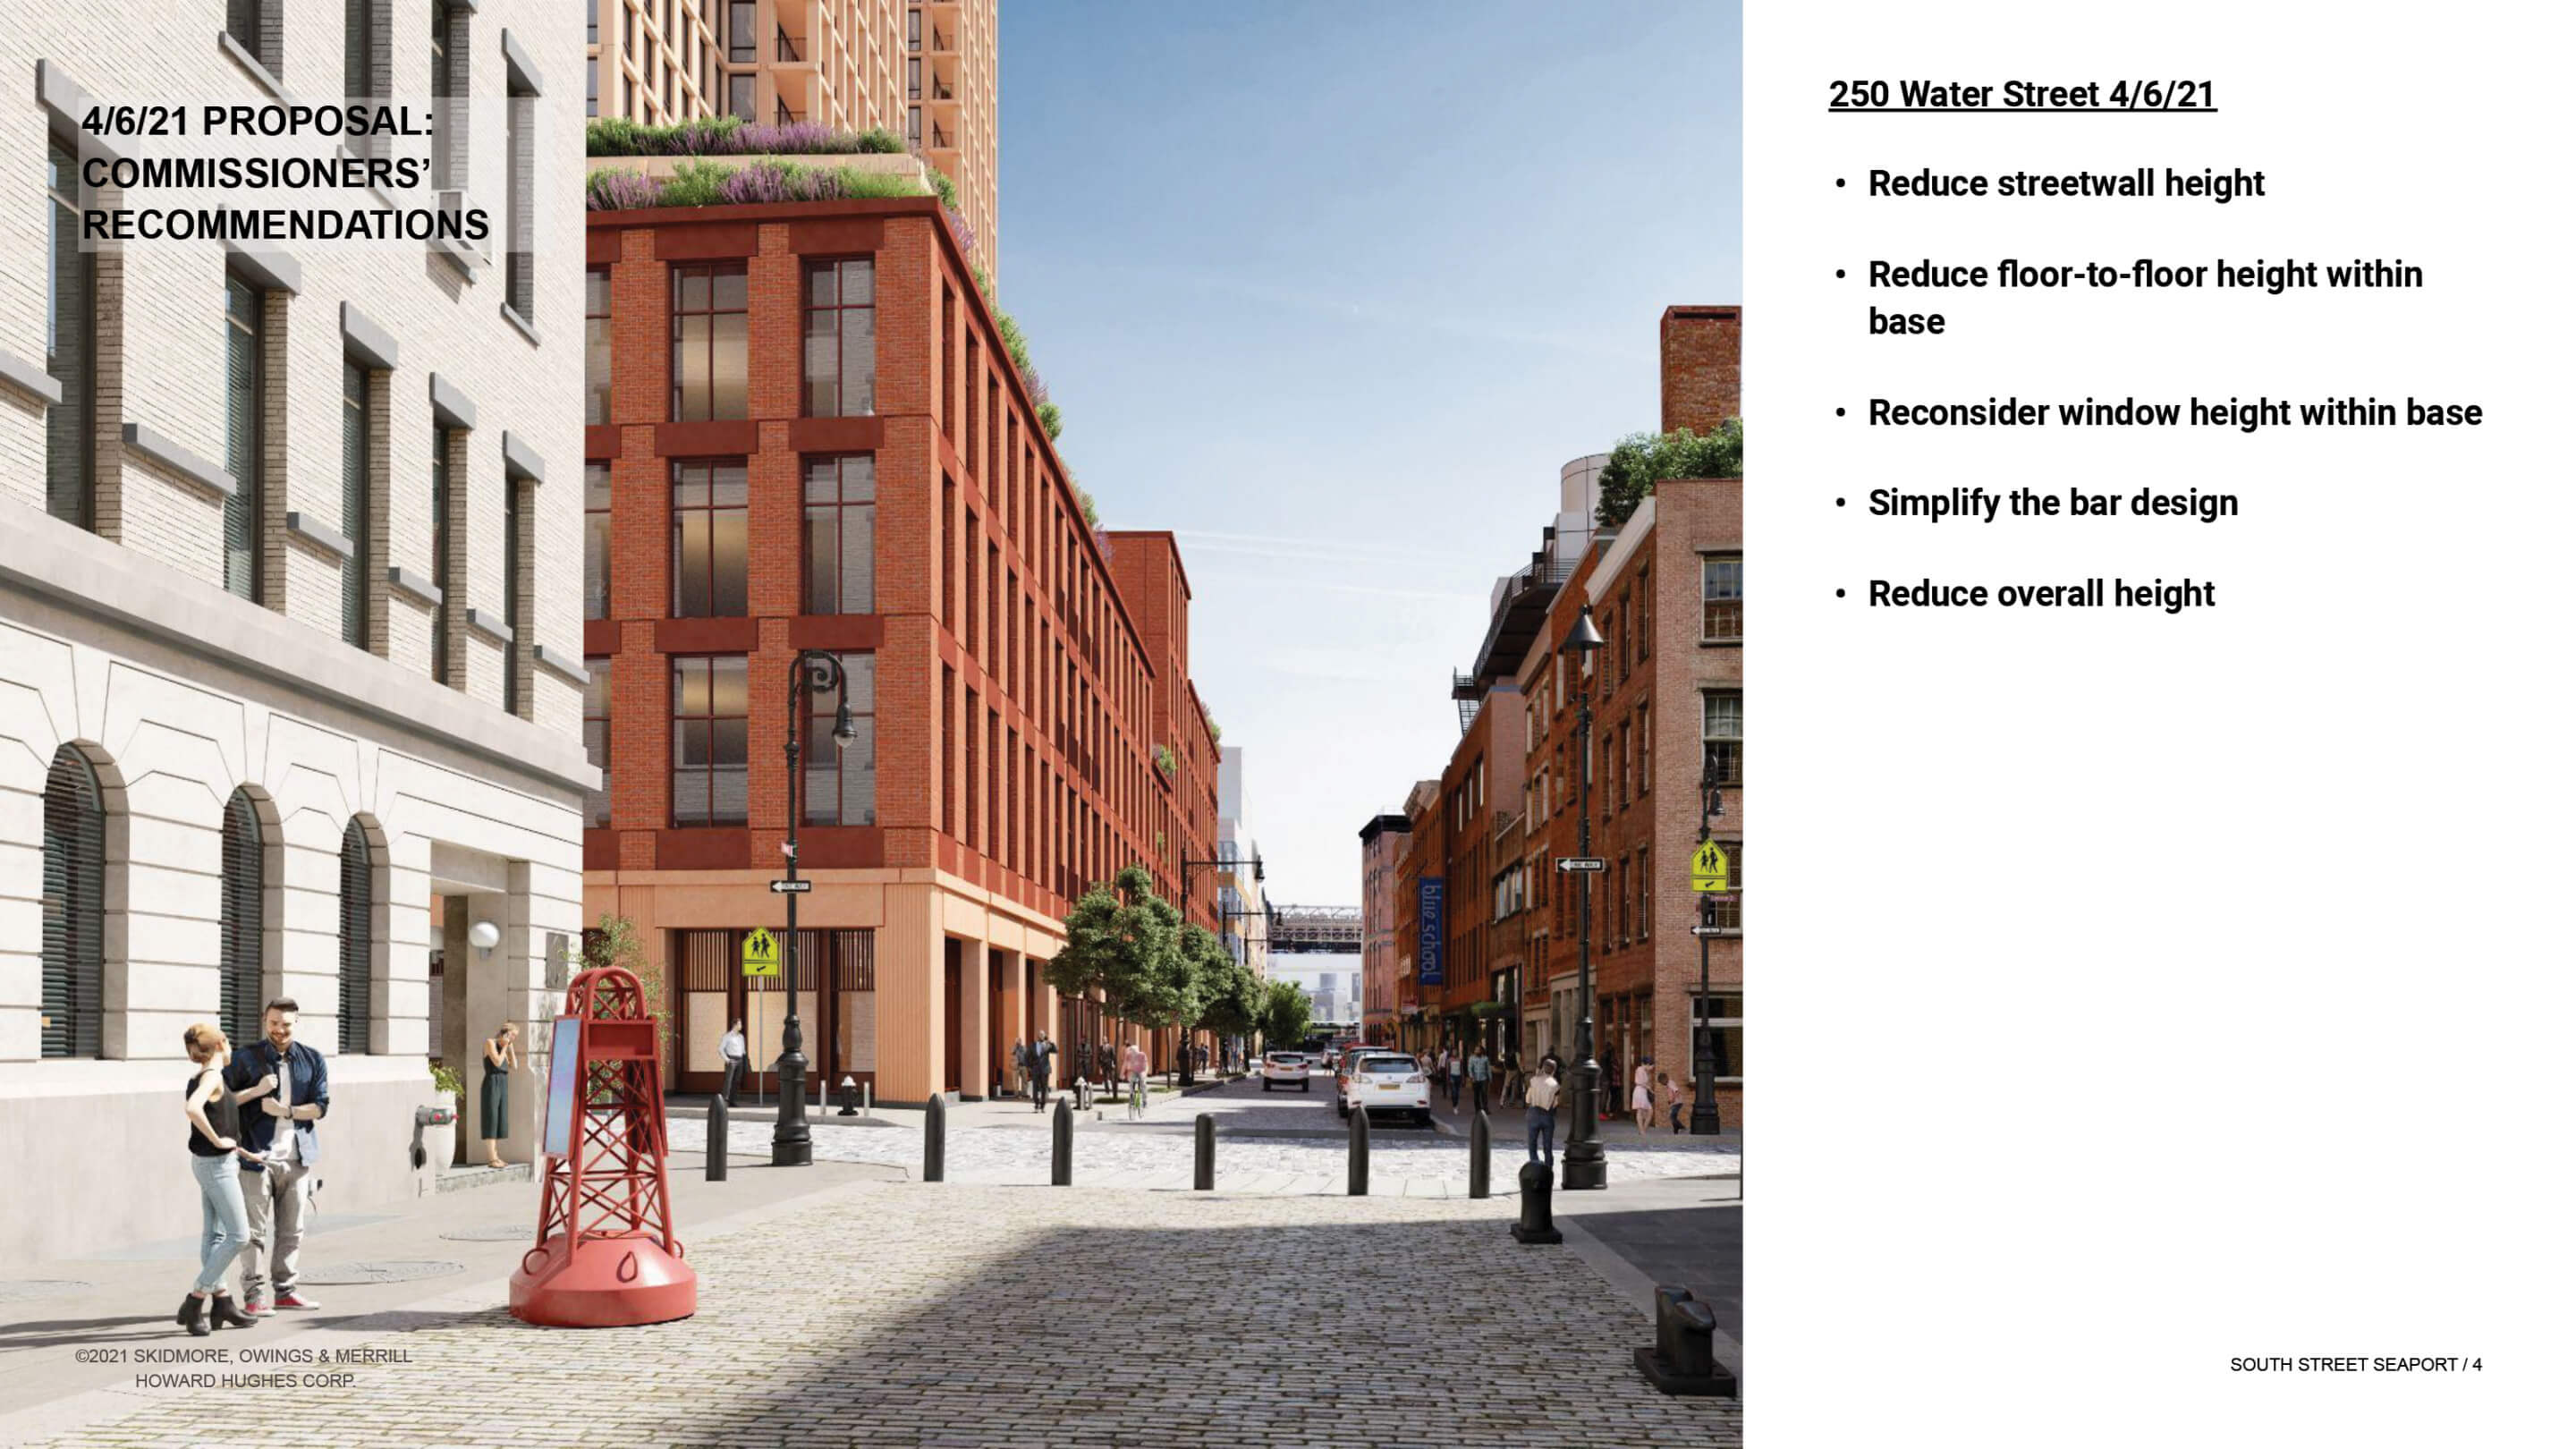 A slide detailing proposed changes (height, bulk, roof line) required for 250 water street